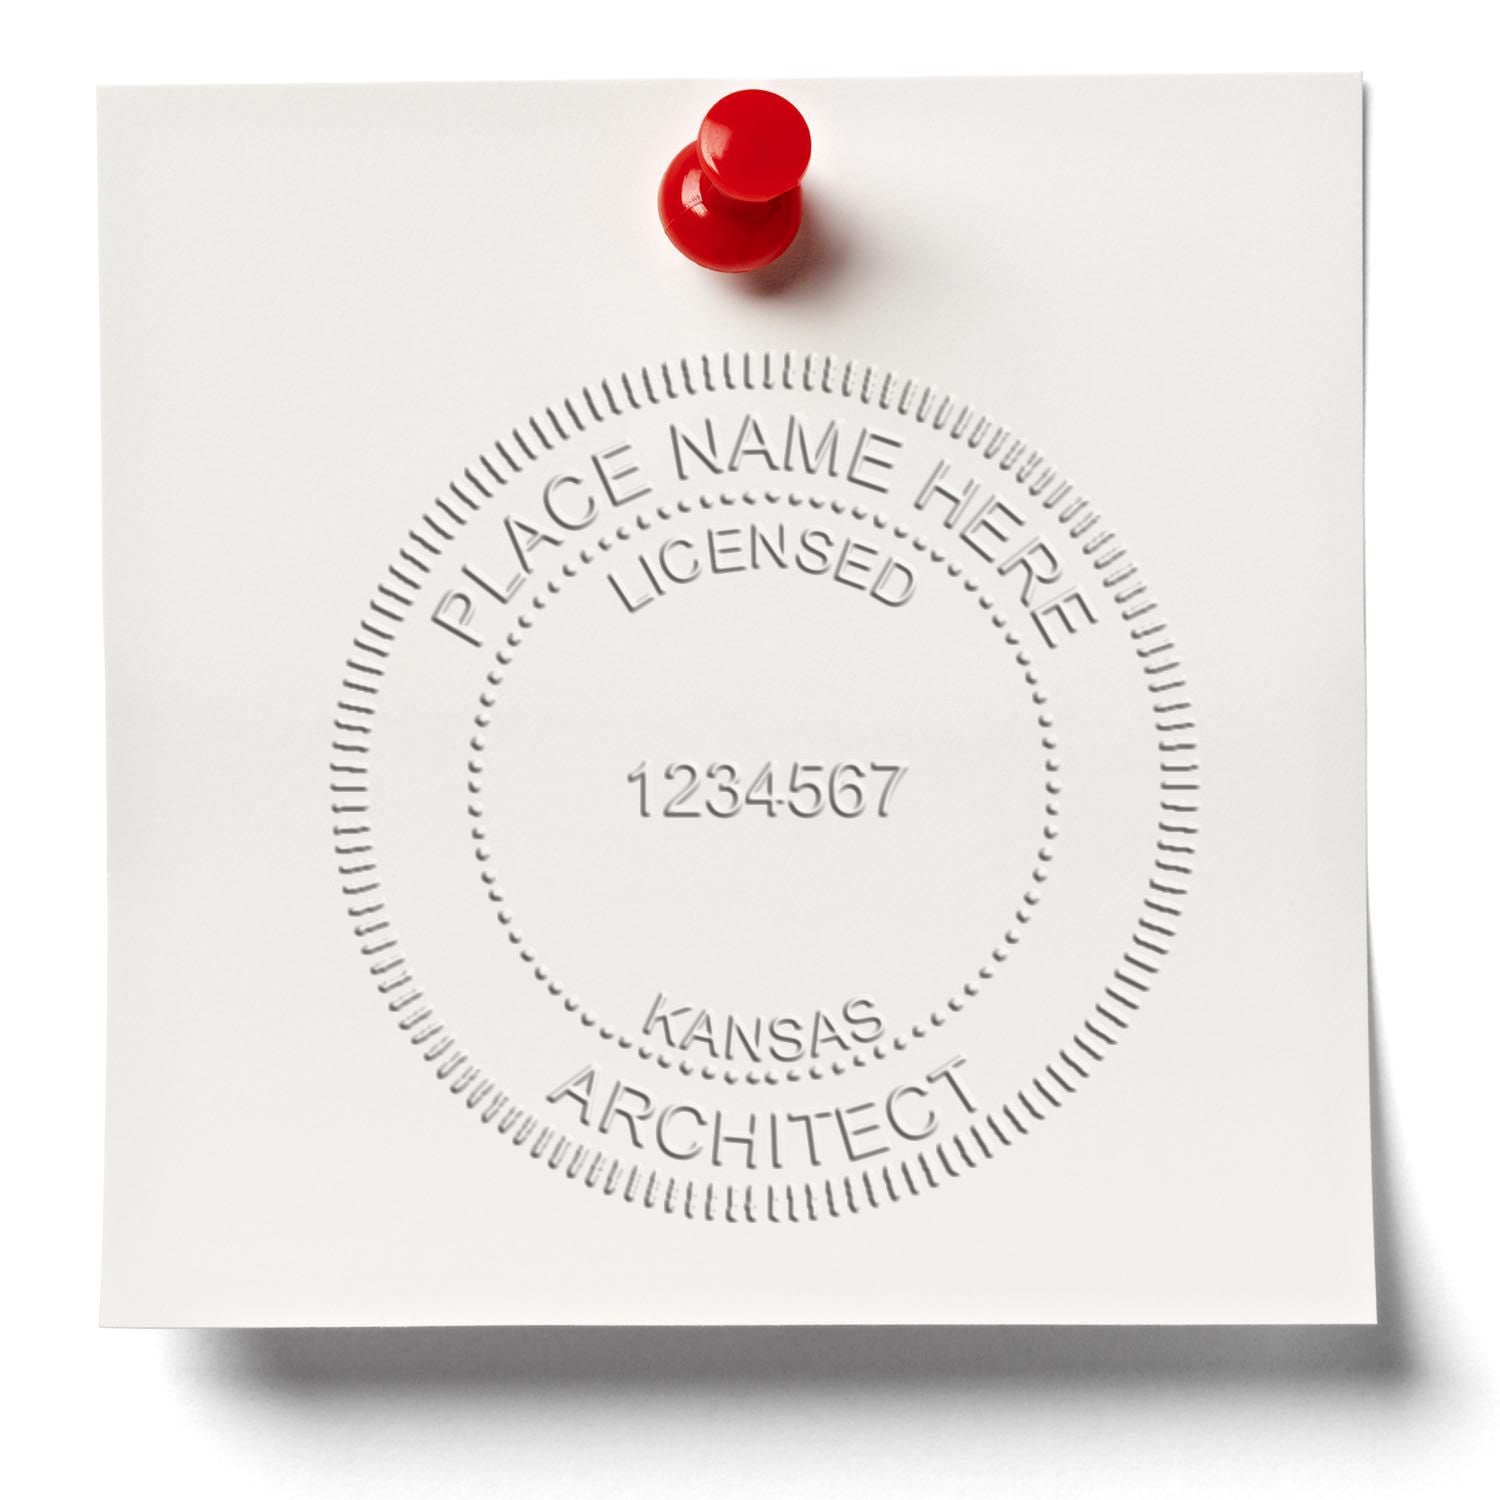 The main image for the Kansas Desk Architect Embossing Seal depicting a sample of the imprint and electronic files